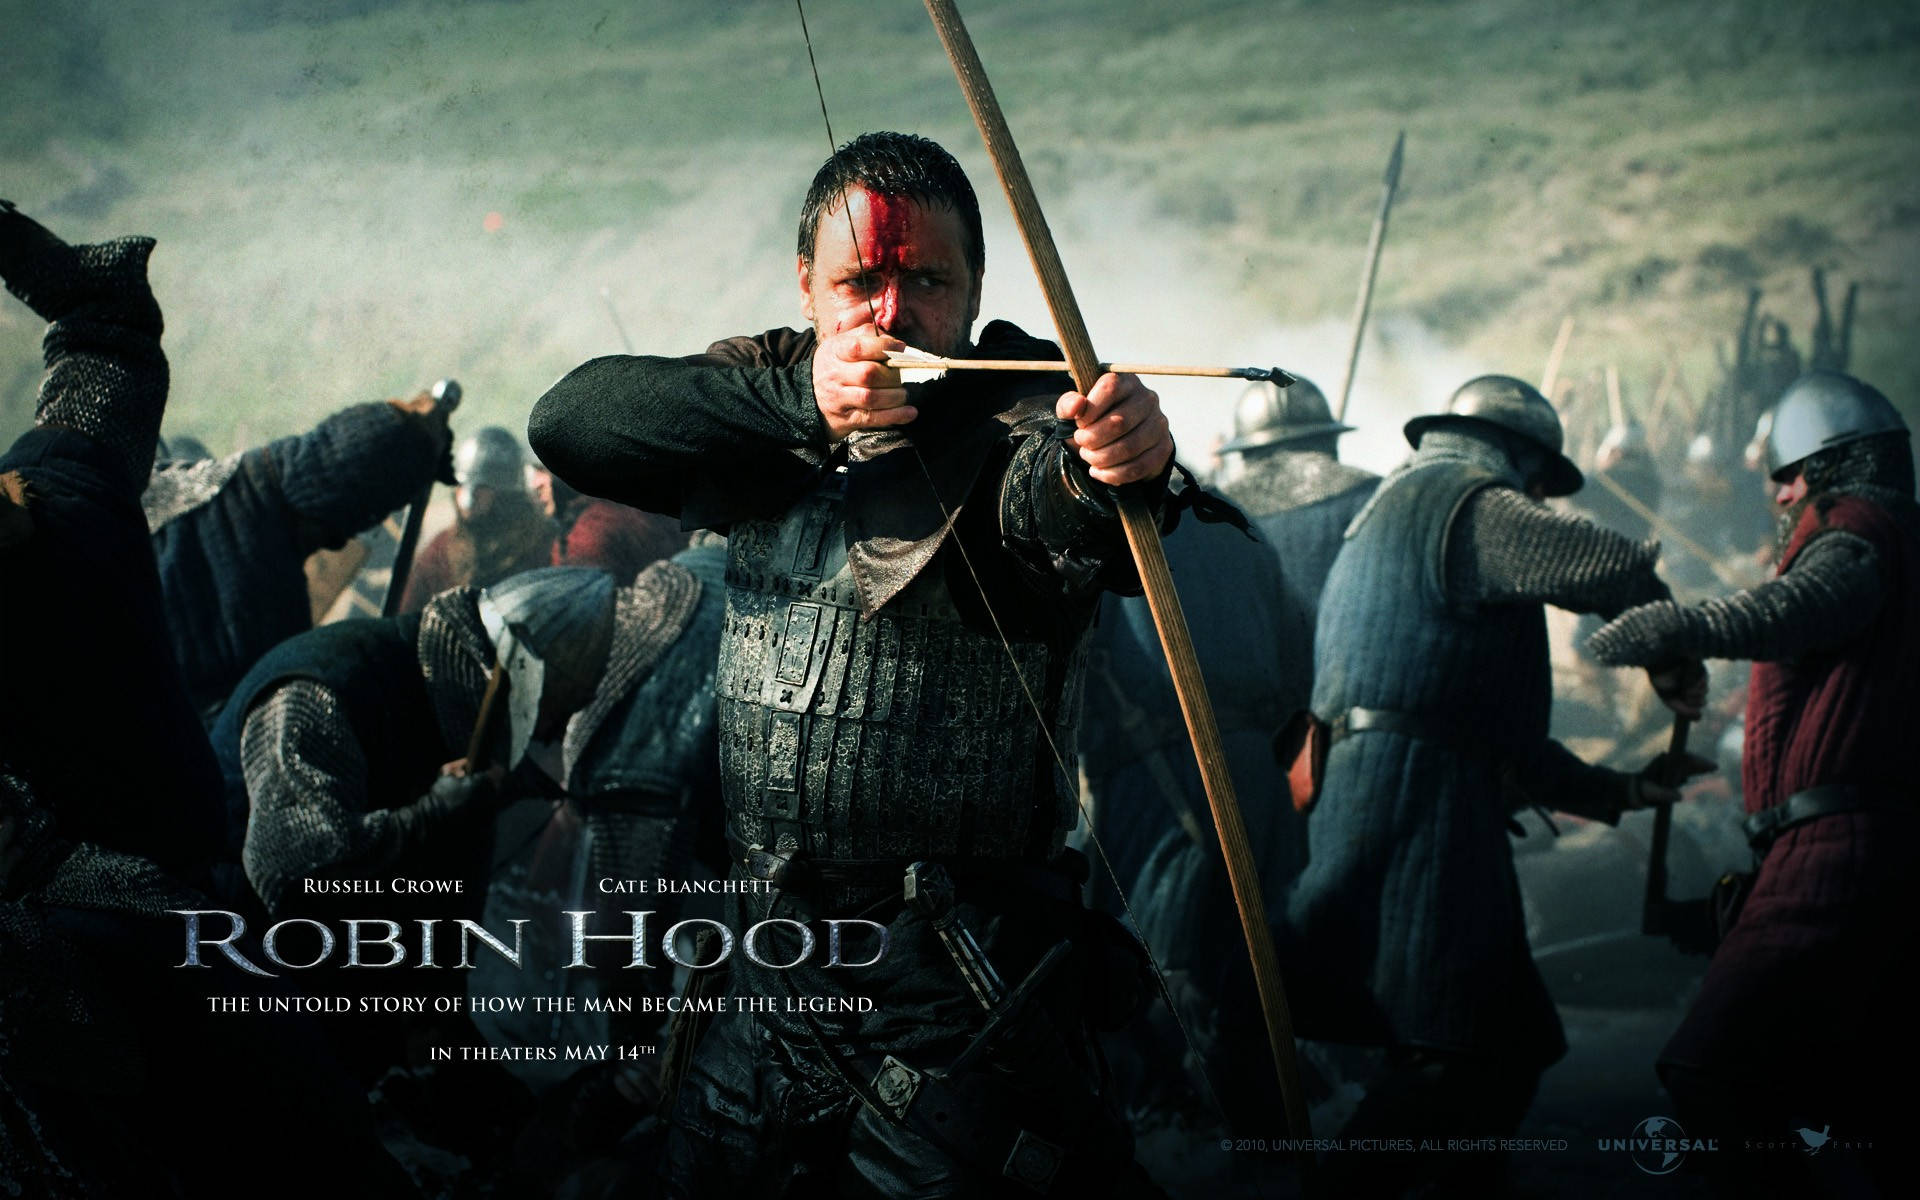 Russellcrowe Em Robin Hood (for A Computer Or Mobile Wallpaper Featuring Russell Crowe As Robin Hood) Papel de Parede